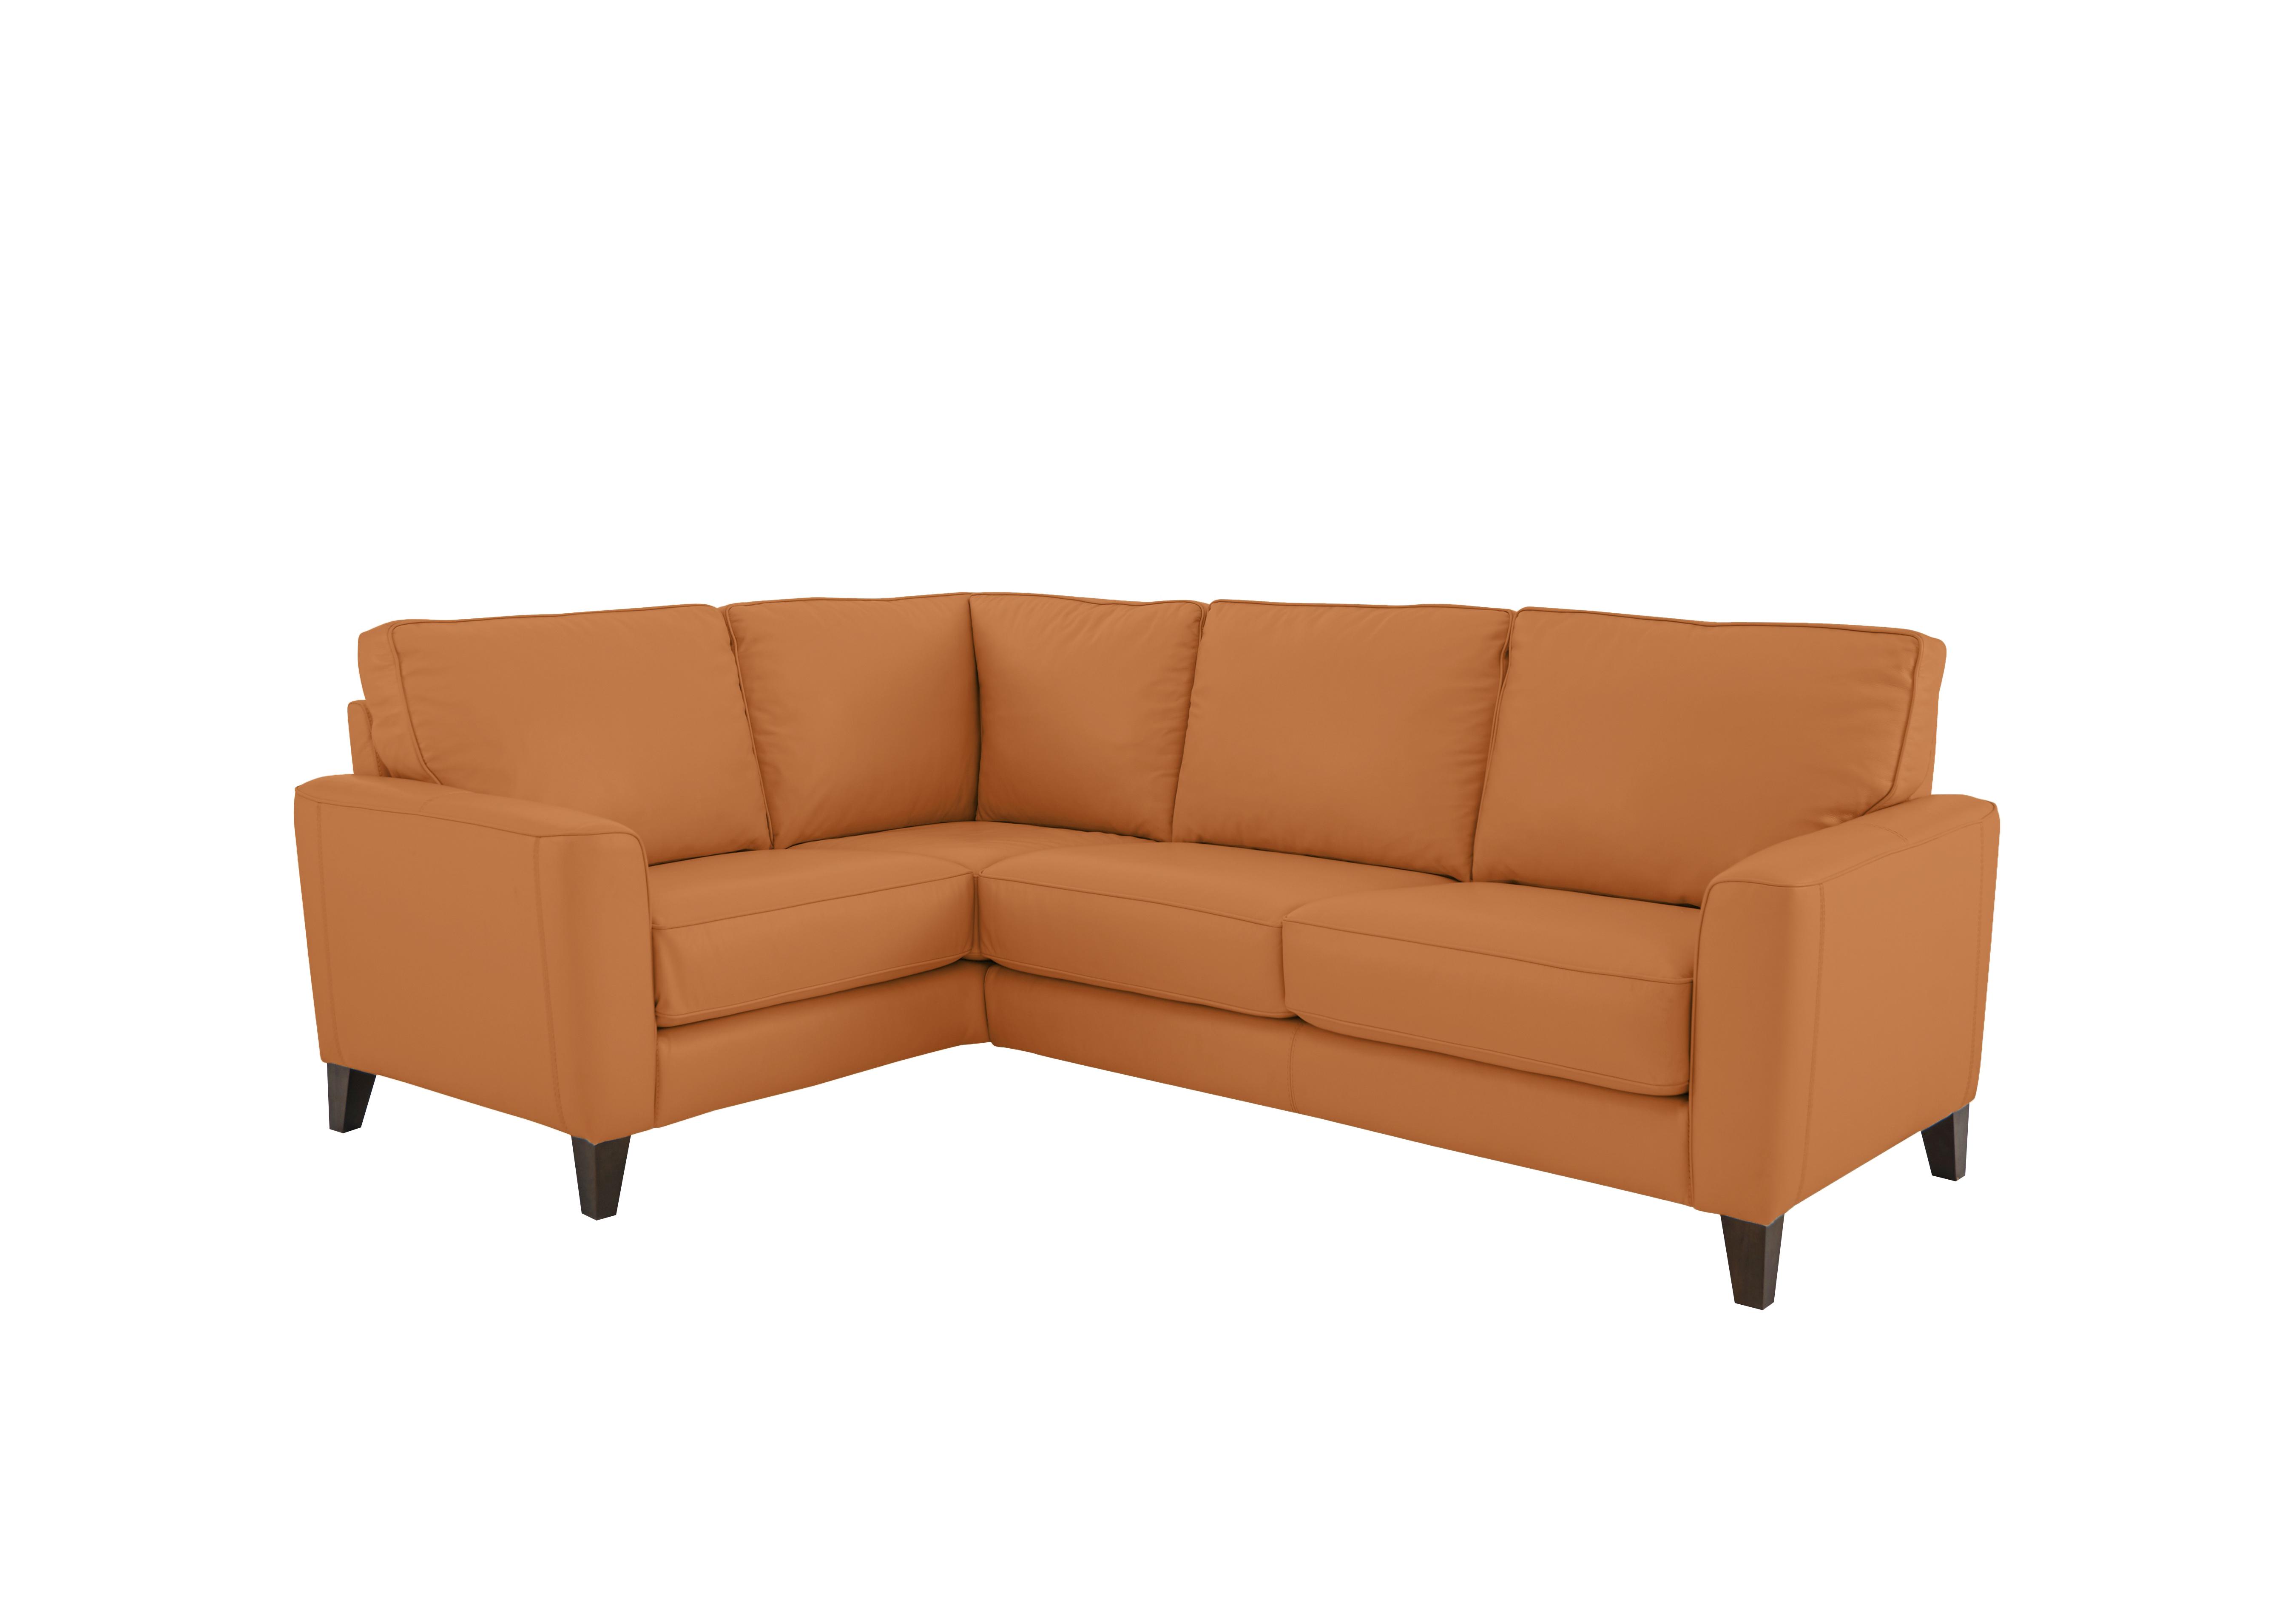 Brondby Small Leather Corner Sofa in Bv-335e Honey Yellow on Furniture Village